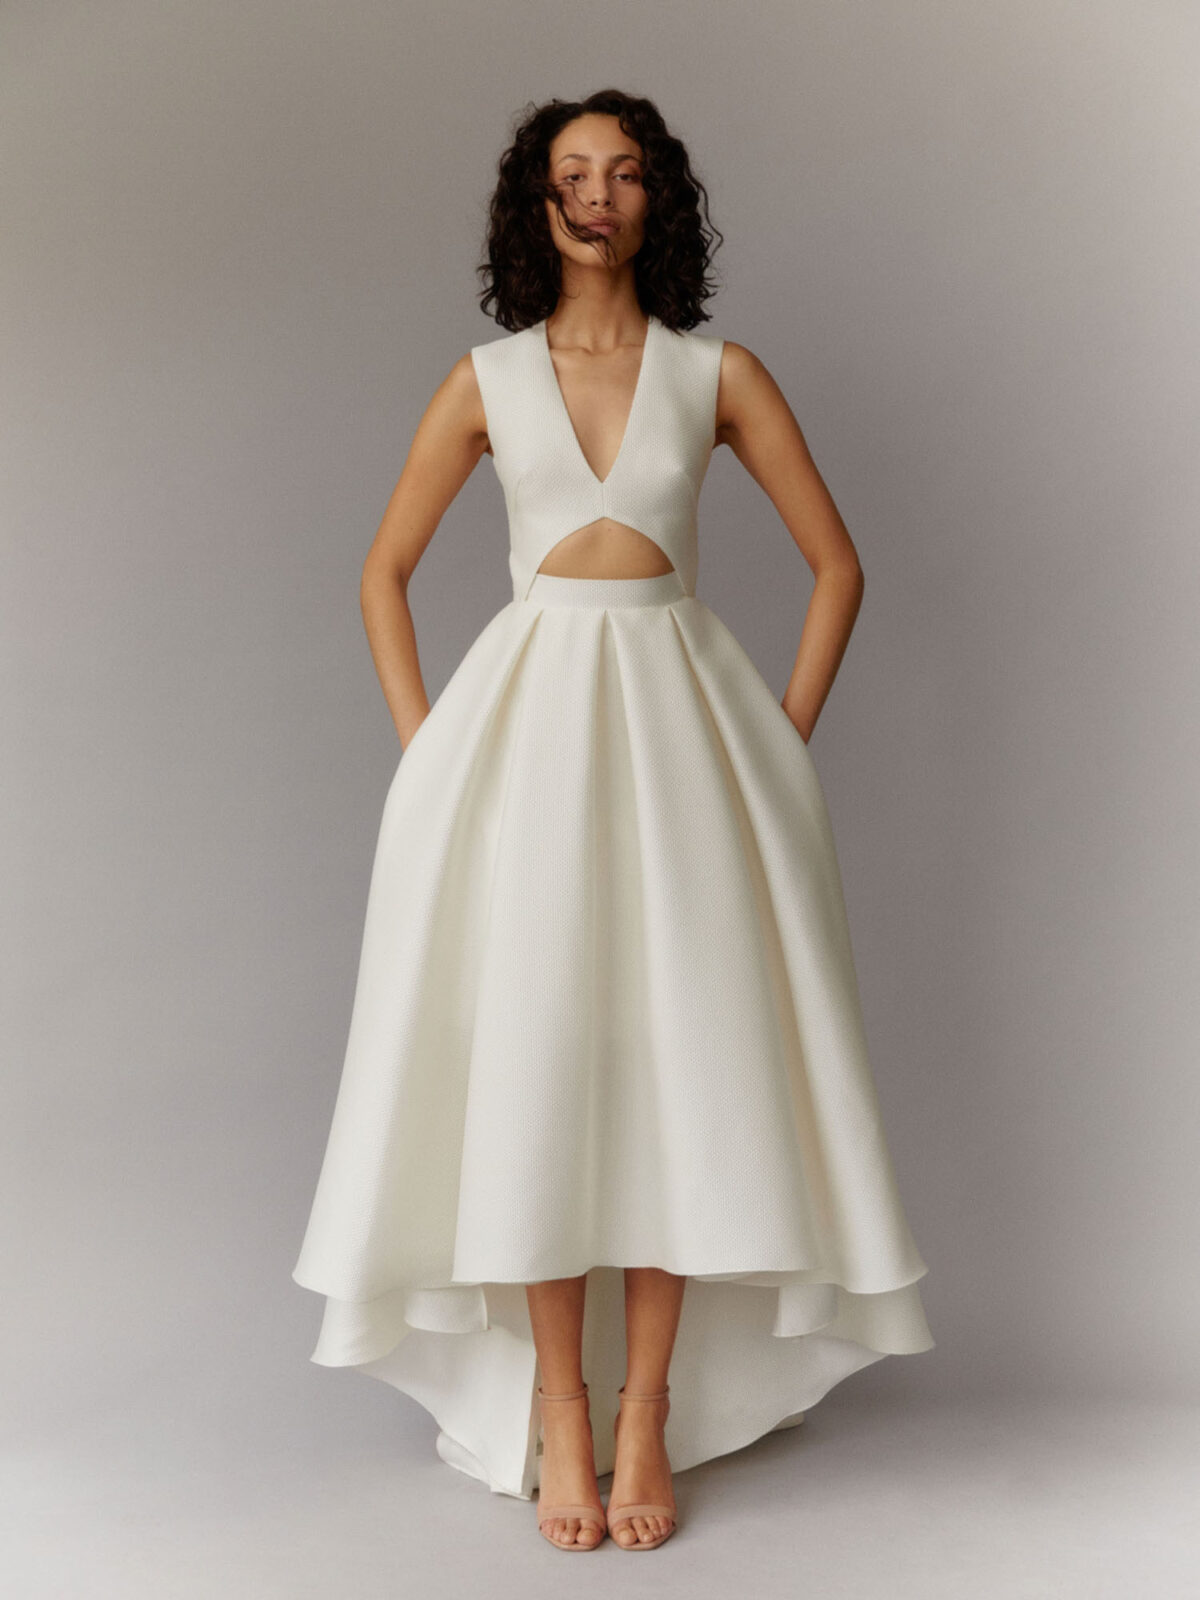 contemporary wedding dress with cut-out detail and high-low skirt in jacquard gazar